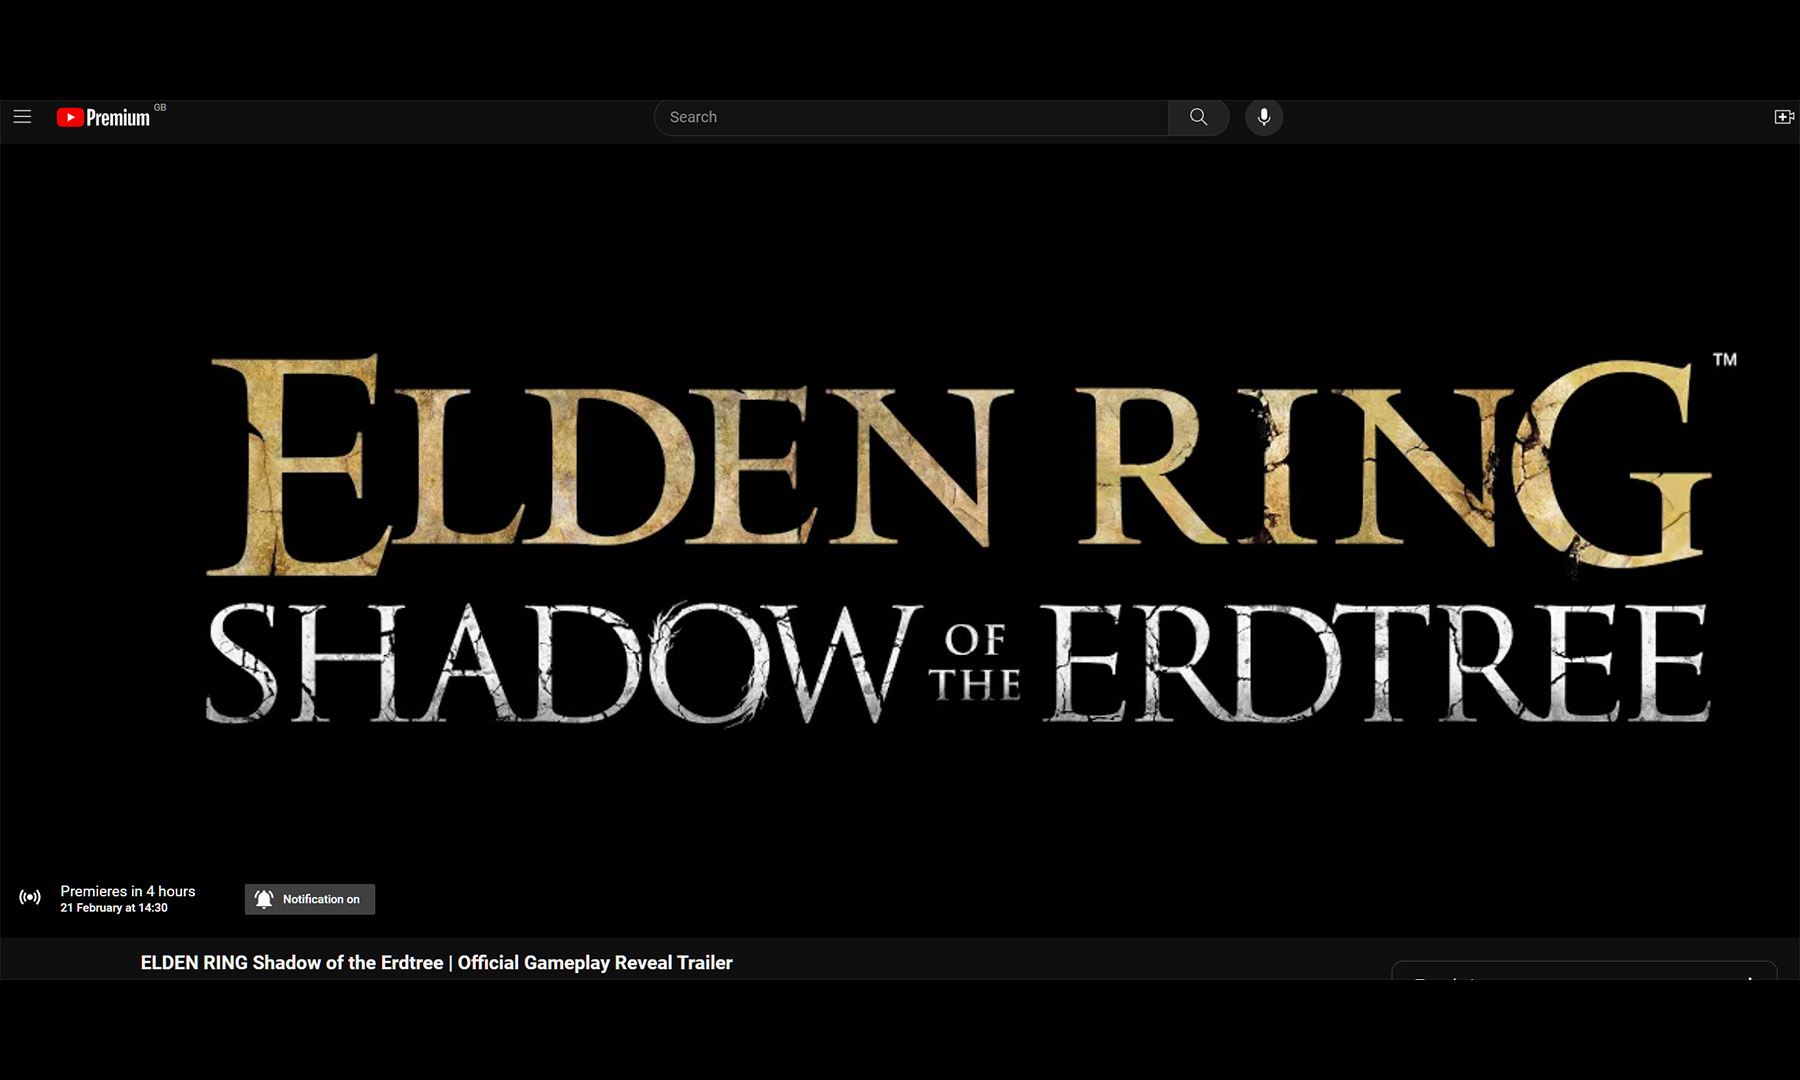 Elden Ring Shadow of the Erdtree: Real Trailer Drops Today